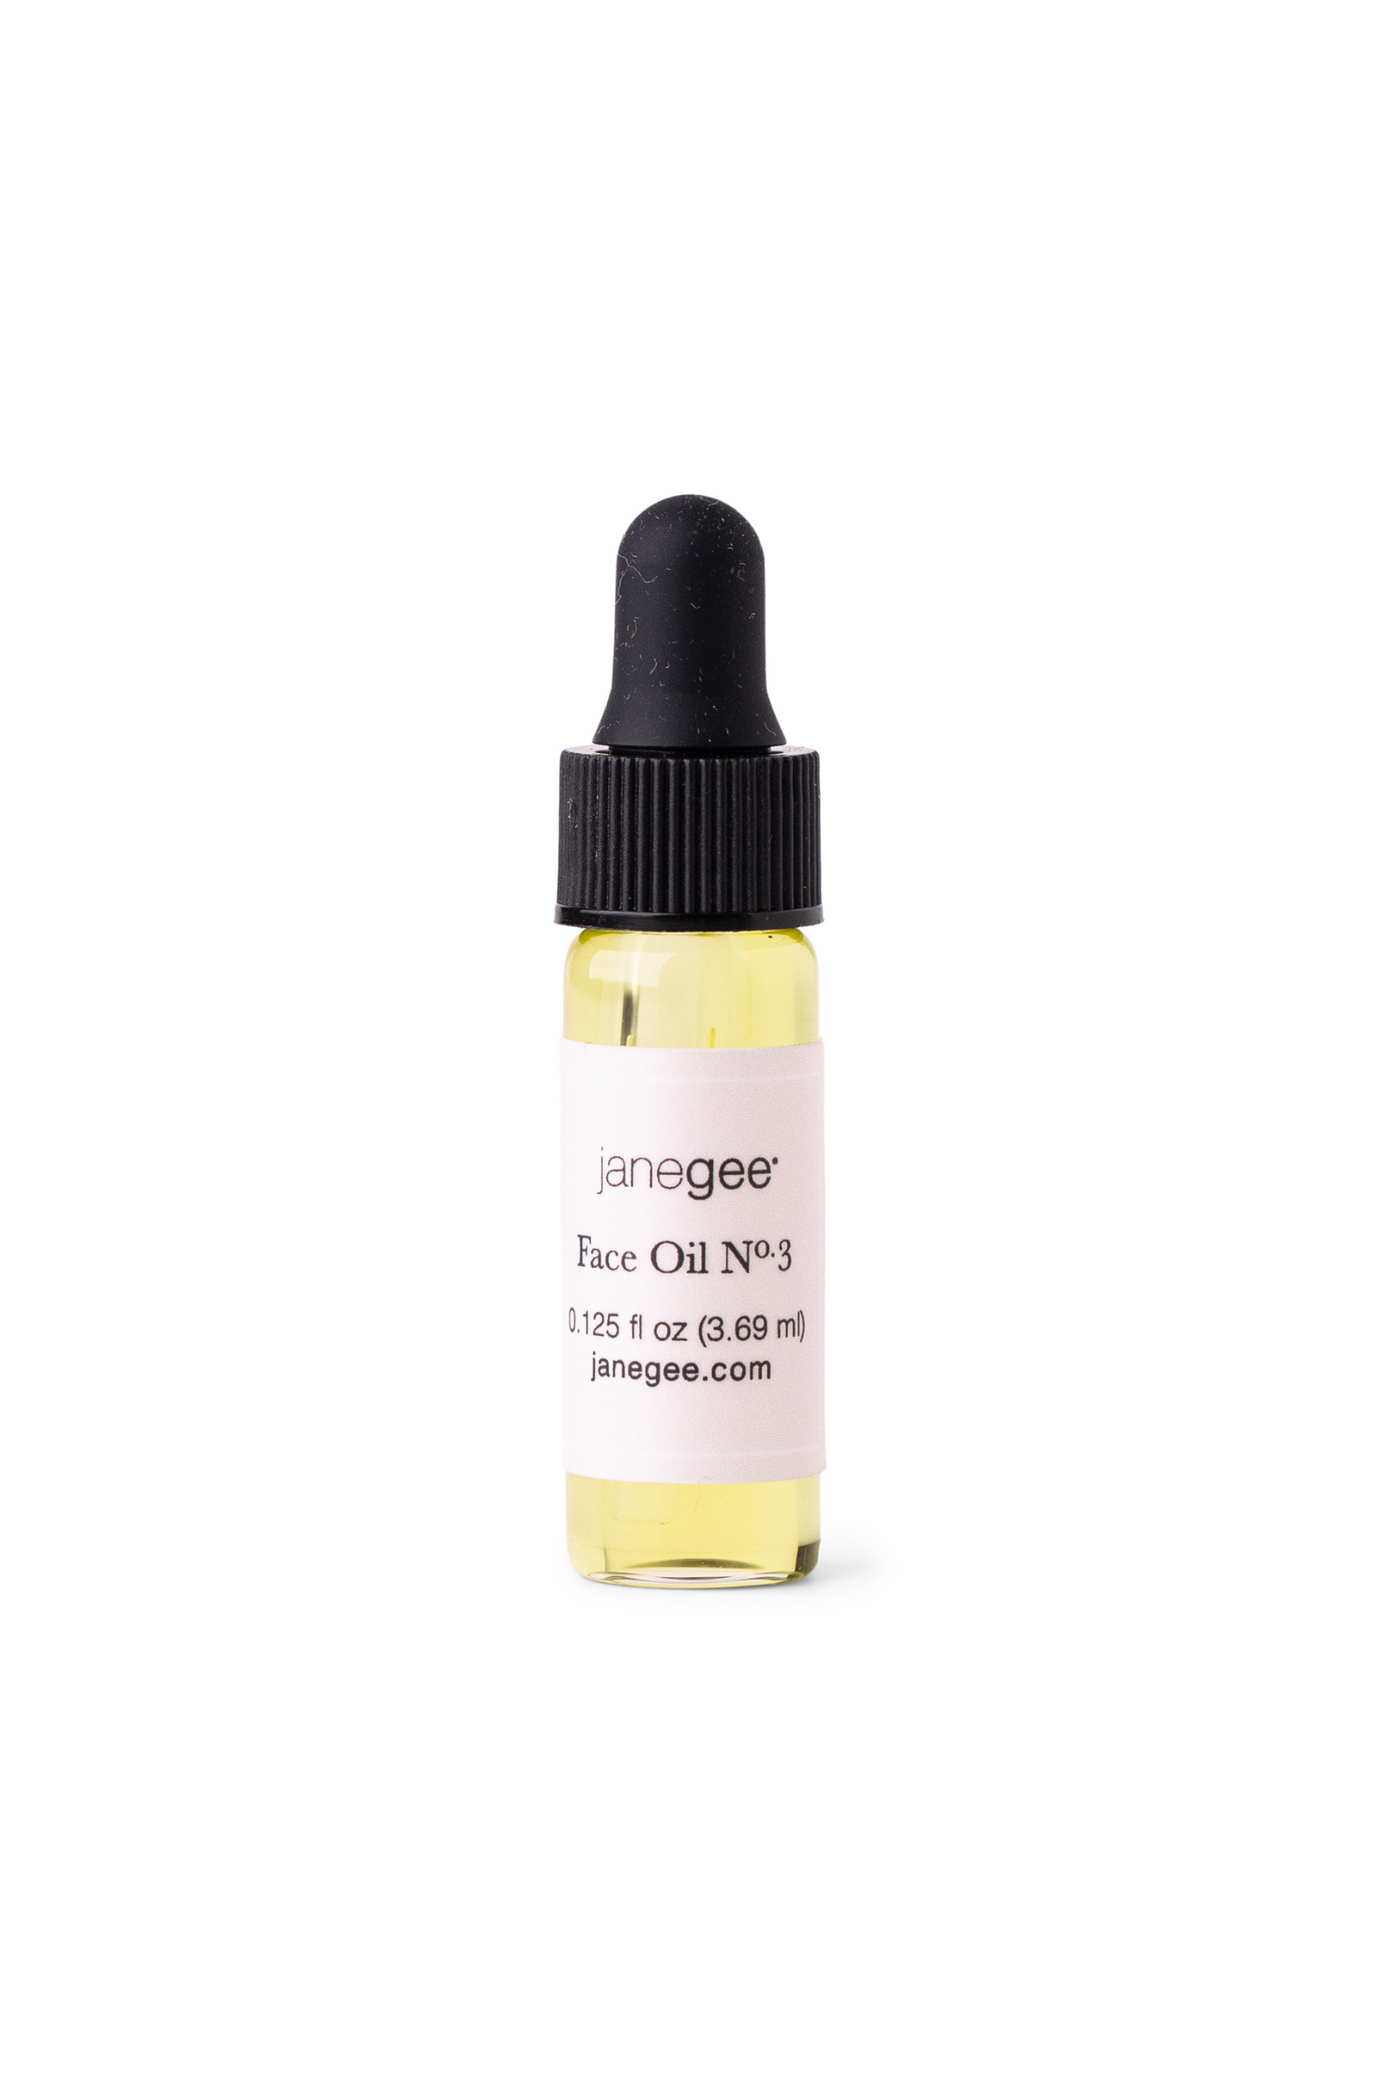 janegee Face Oil No.3 Sample